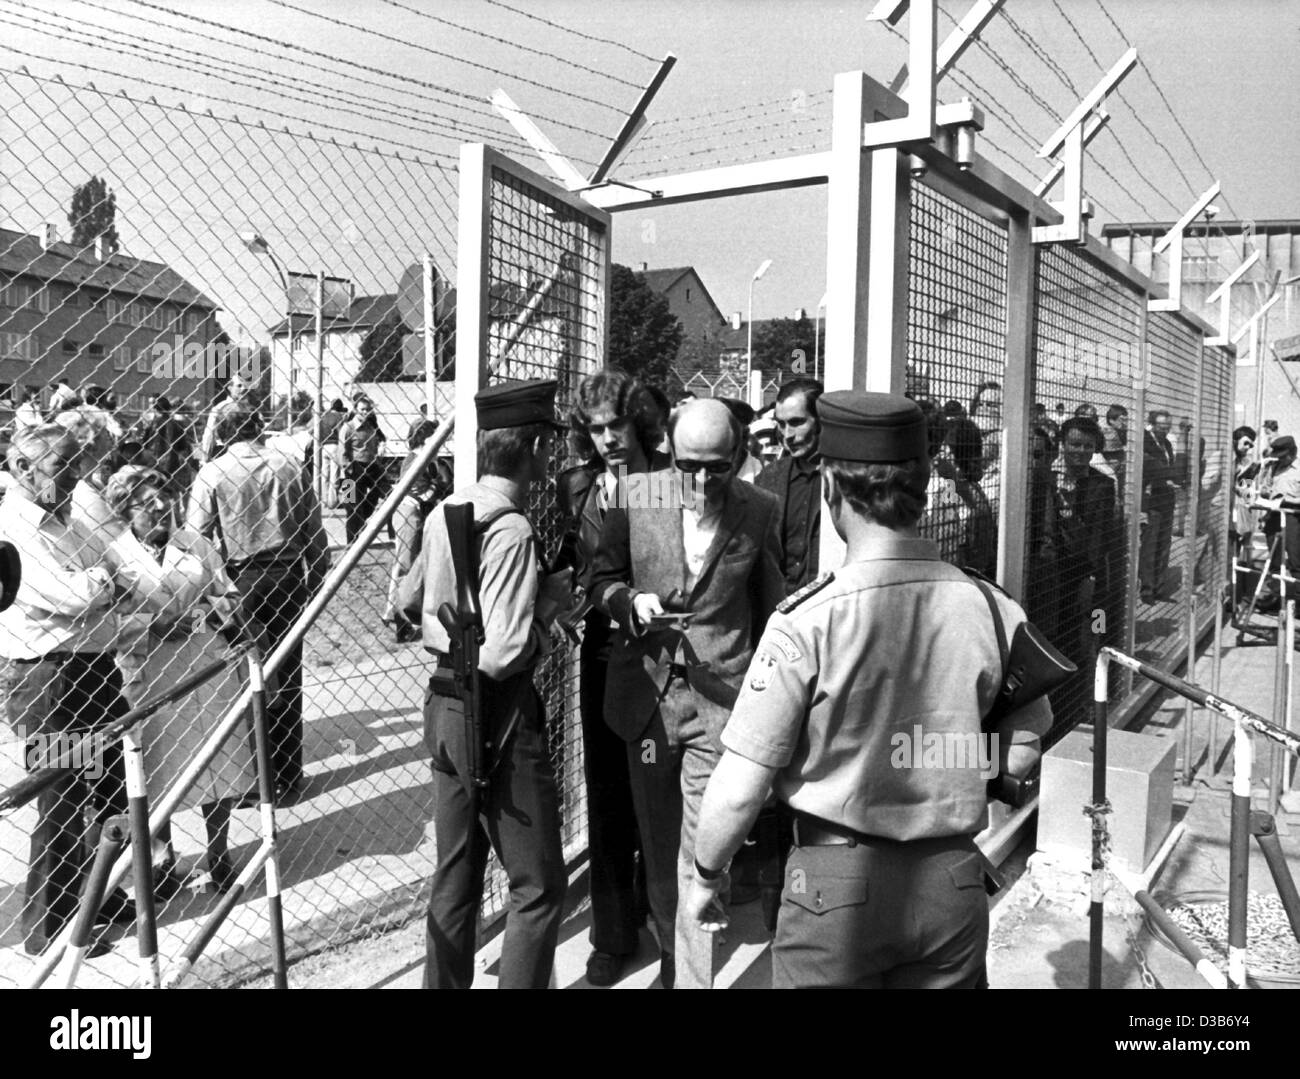 (dpa files) - Spectators are frisked before the start of the trial of the RAF terrorists Andreas Baader, Ulrike Meinhof, Gudrun Ensslin and Jan-Carl Raspe which is held in the prison in Stuttgart-Stammhein, 21 May 1975. After the longest trial in German history, Baader, Ensslin and Raspe were convic Stock Photo